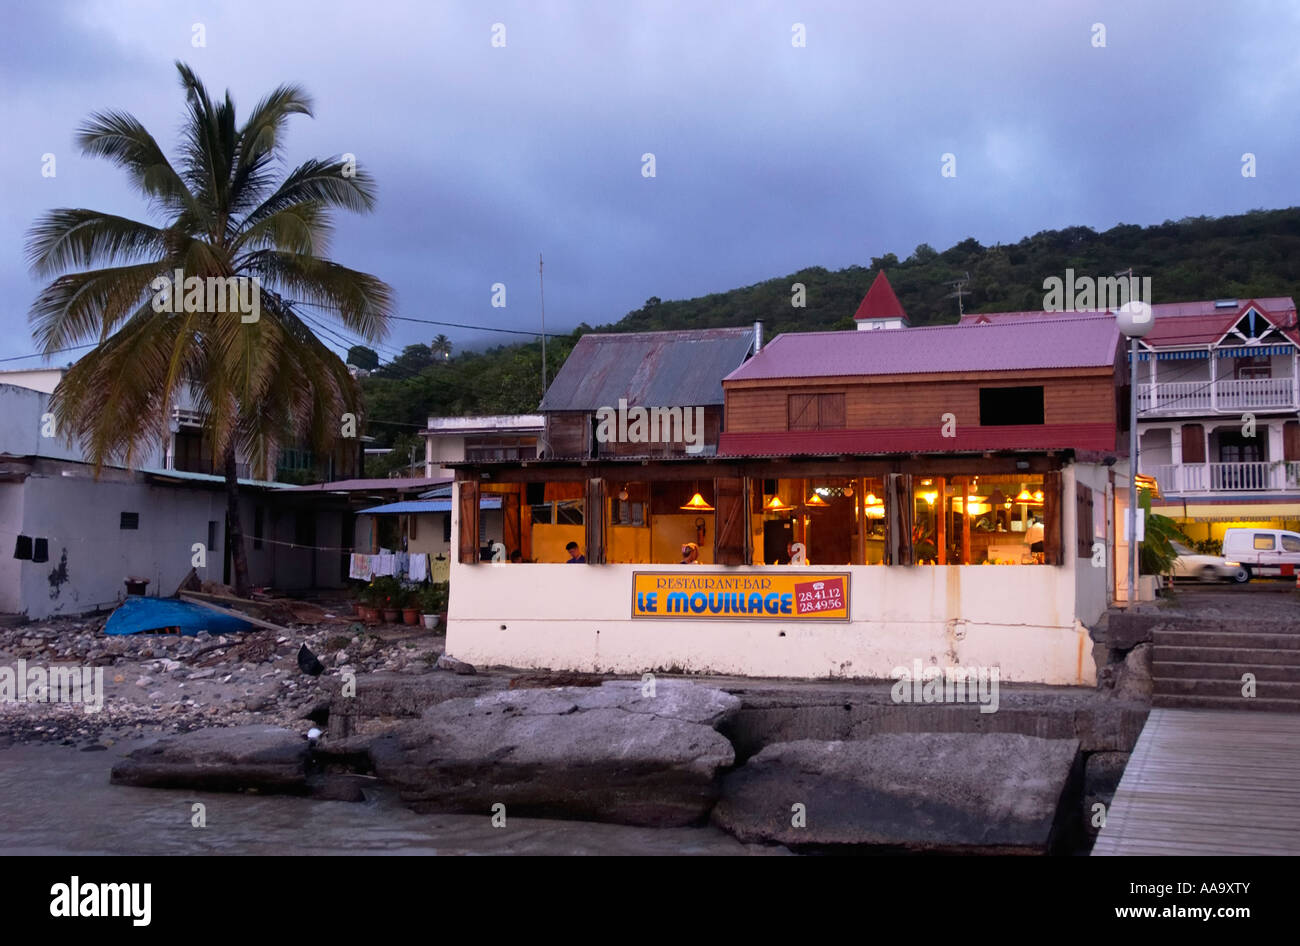 A restaurant at the ocean front of Deshaies, Guadeloupe FR Stock Photo